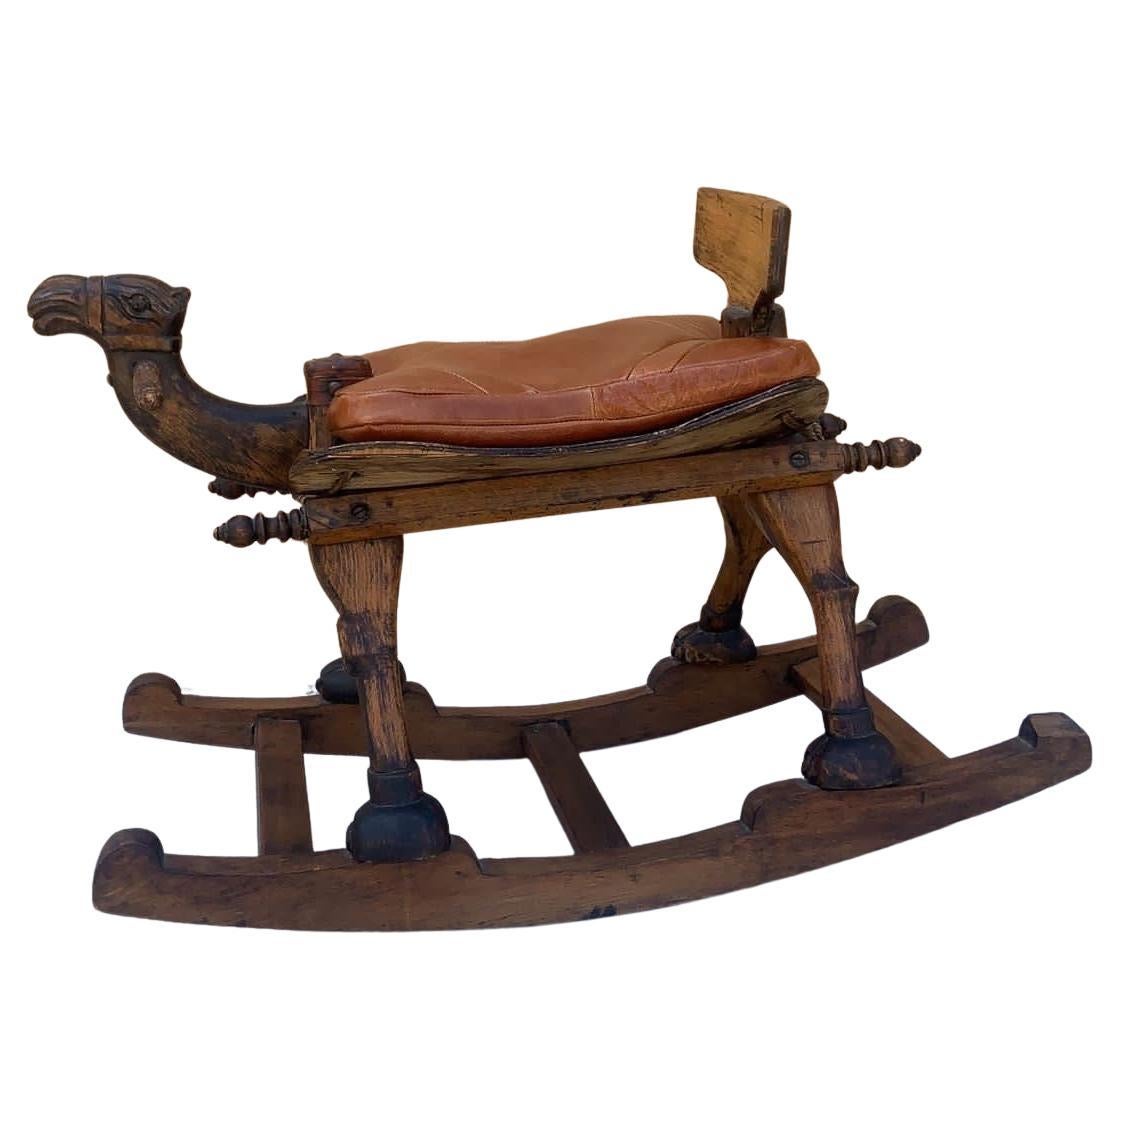 Antique Hand Carved Turkish Wood Camel Rocker with Leather Cushion Seat For Sale